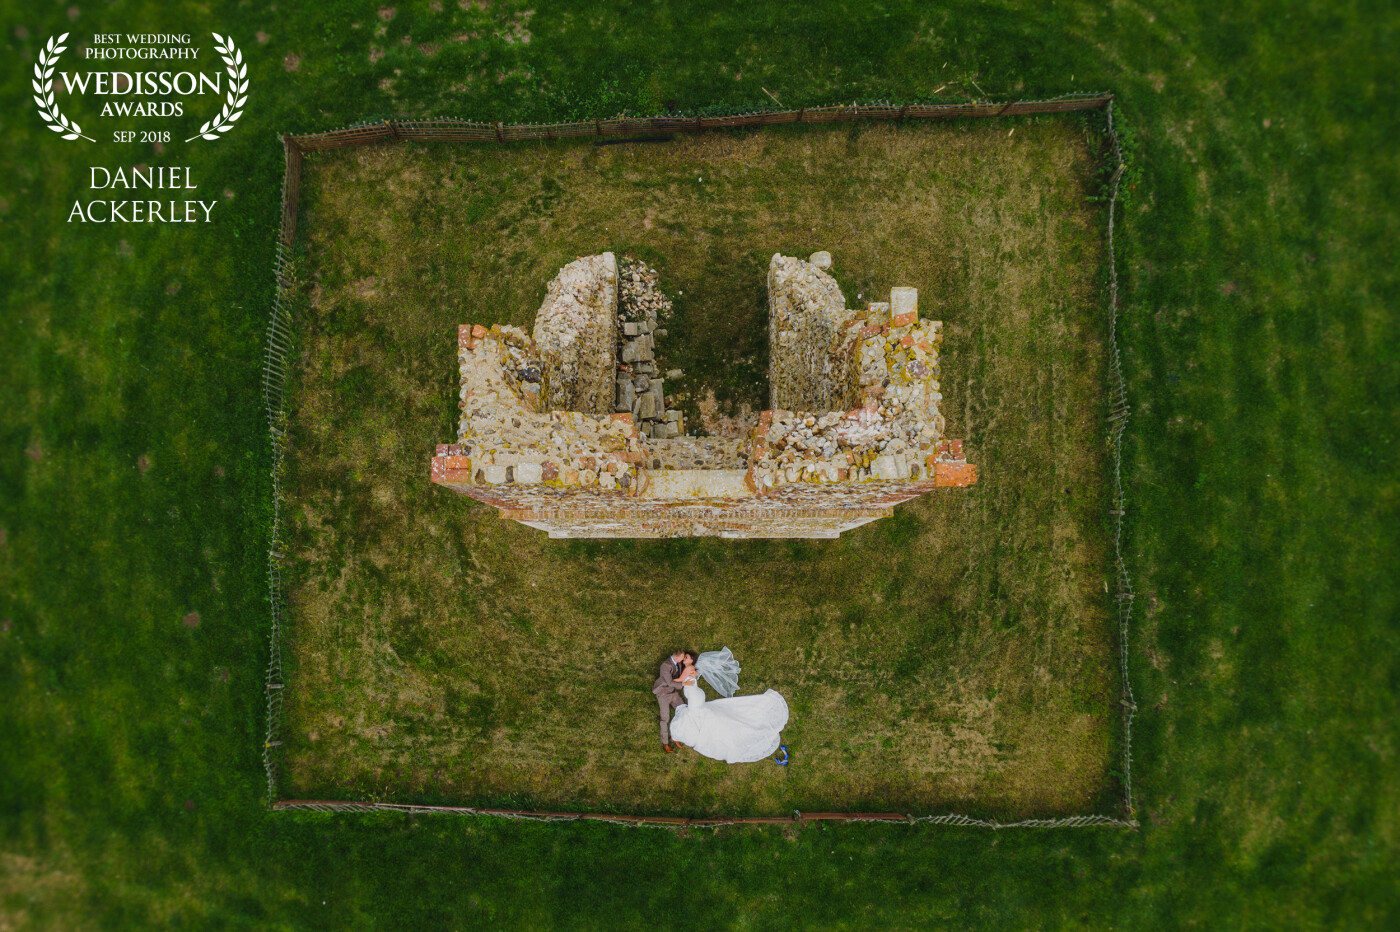 This was a collaboration with my friend Ed Bray who helped me capture this image with a drone at Godwick Hall in Norfolk, UK. Alice and Nick were a dream couple, up for anything we suggested, so we decided to use the old abandoned church spire as the location for a 'birds-eye' style composition and it turned out awesome! 